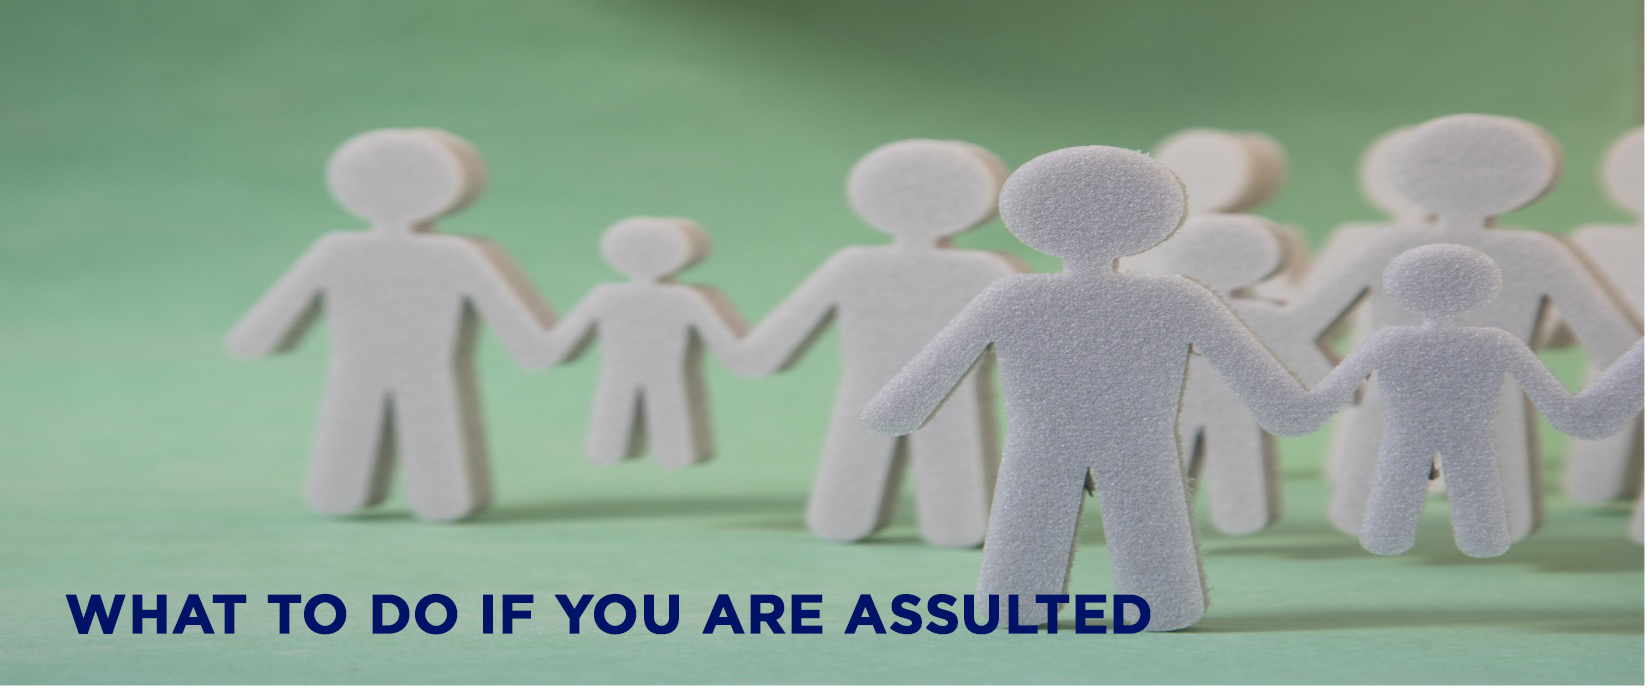 What to do if you are assulted